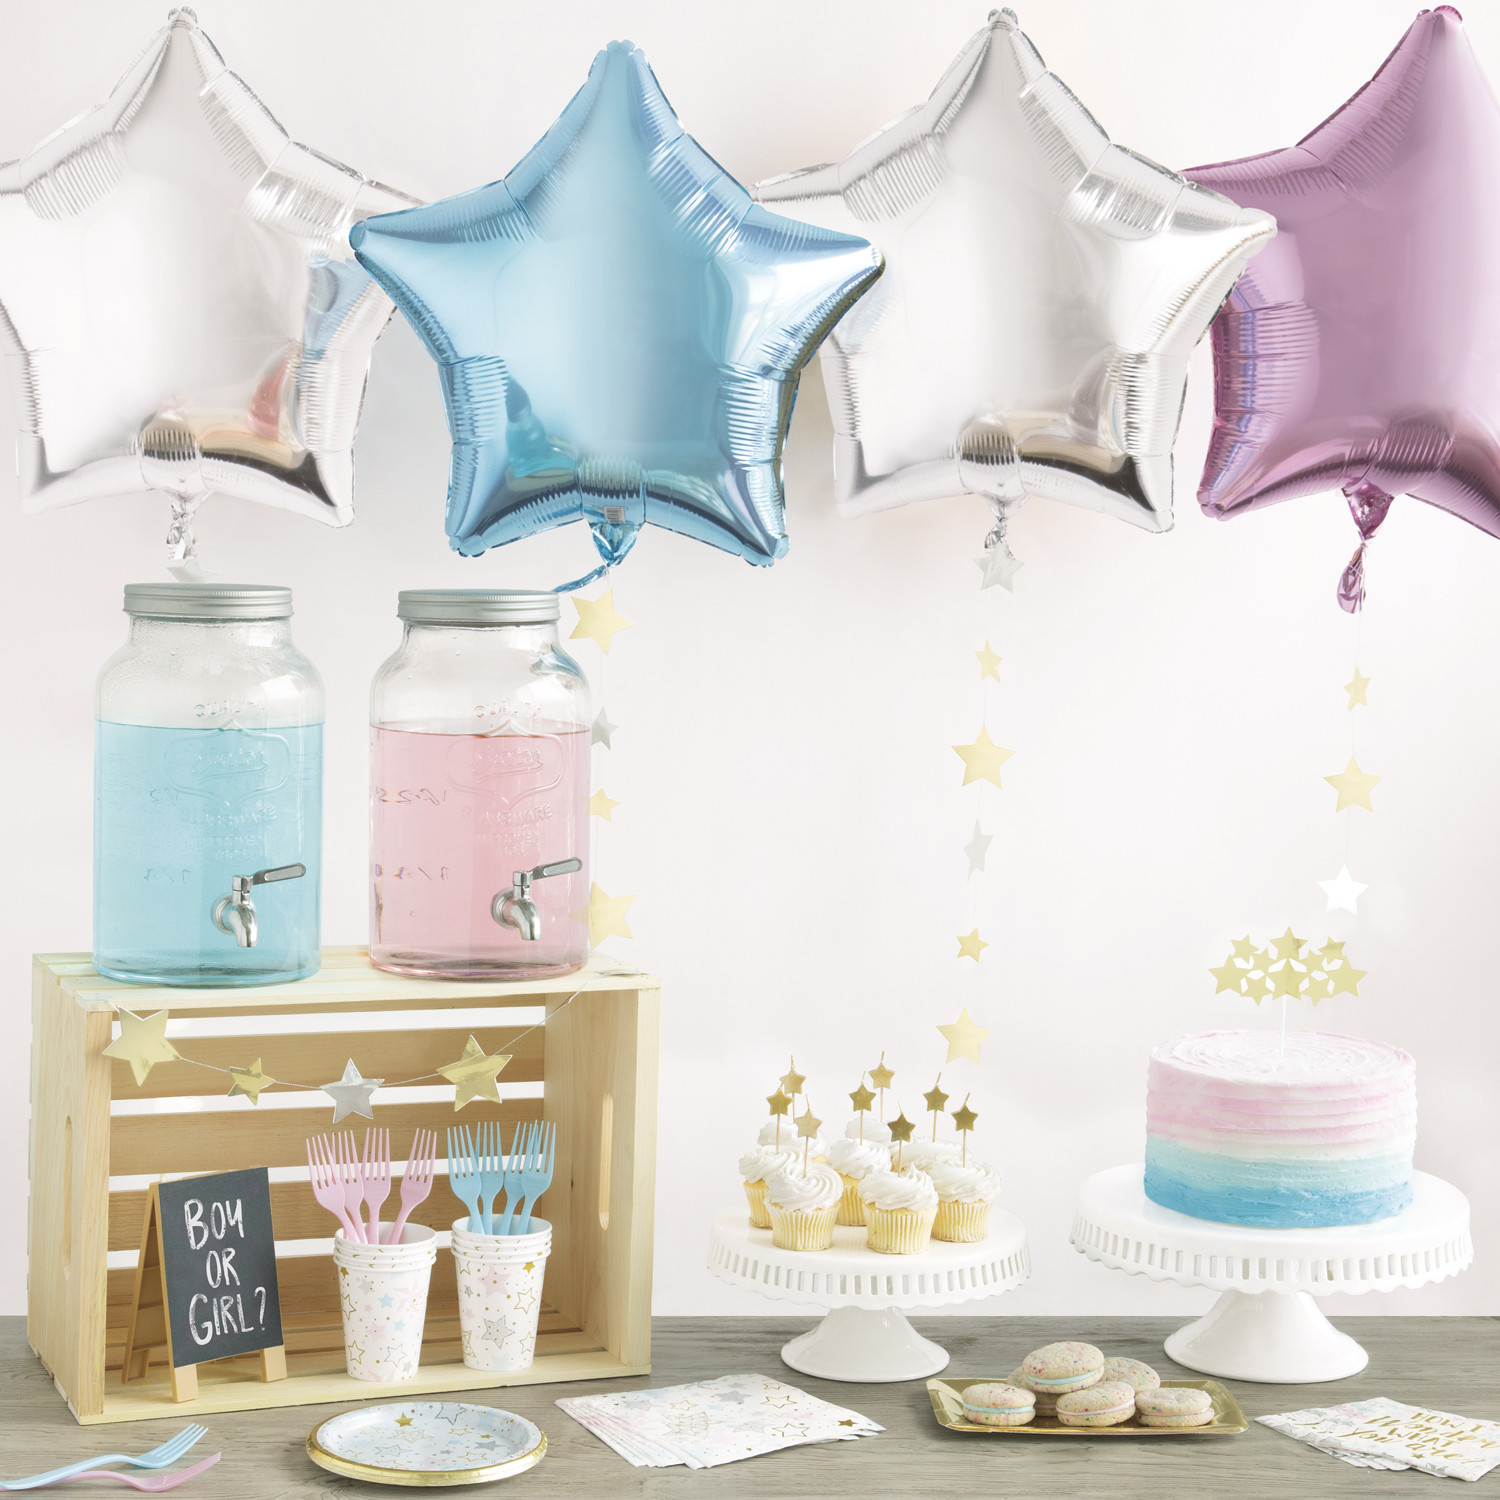 Ideas For Gender Reveal Party
 Gender Reveal Party Ideas